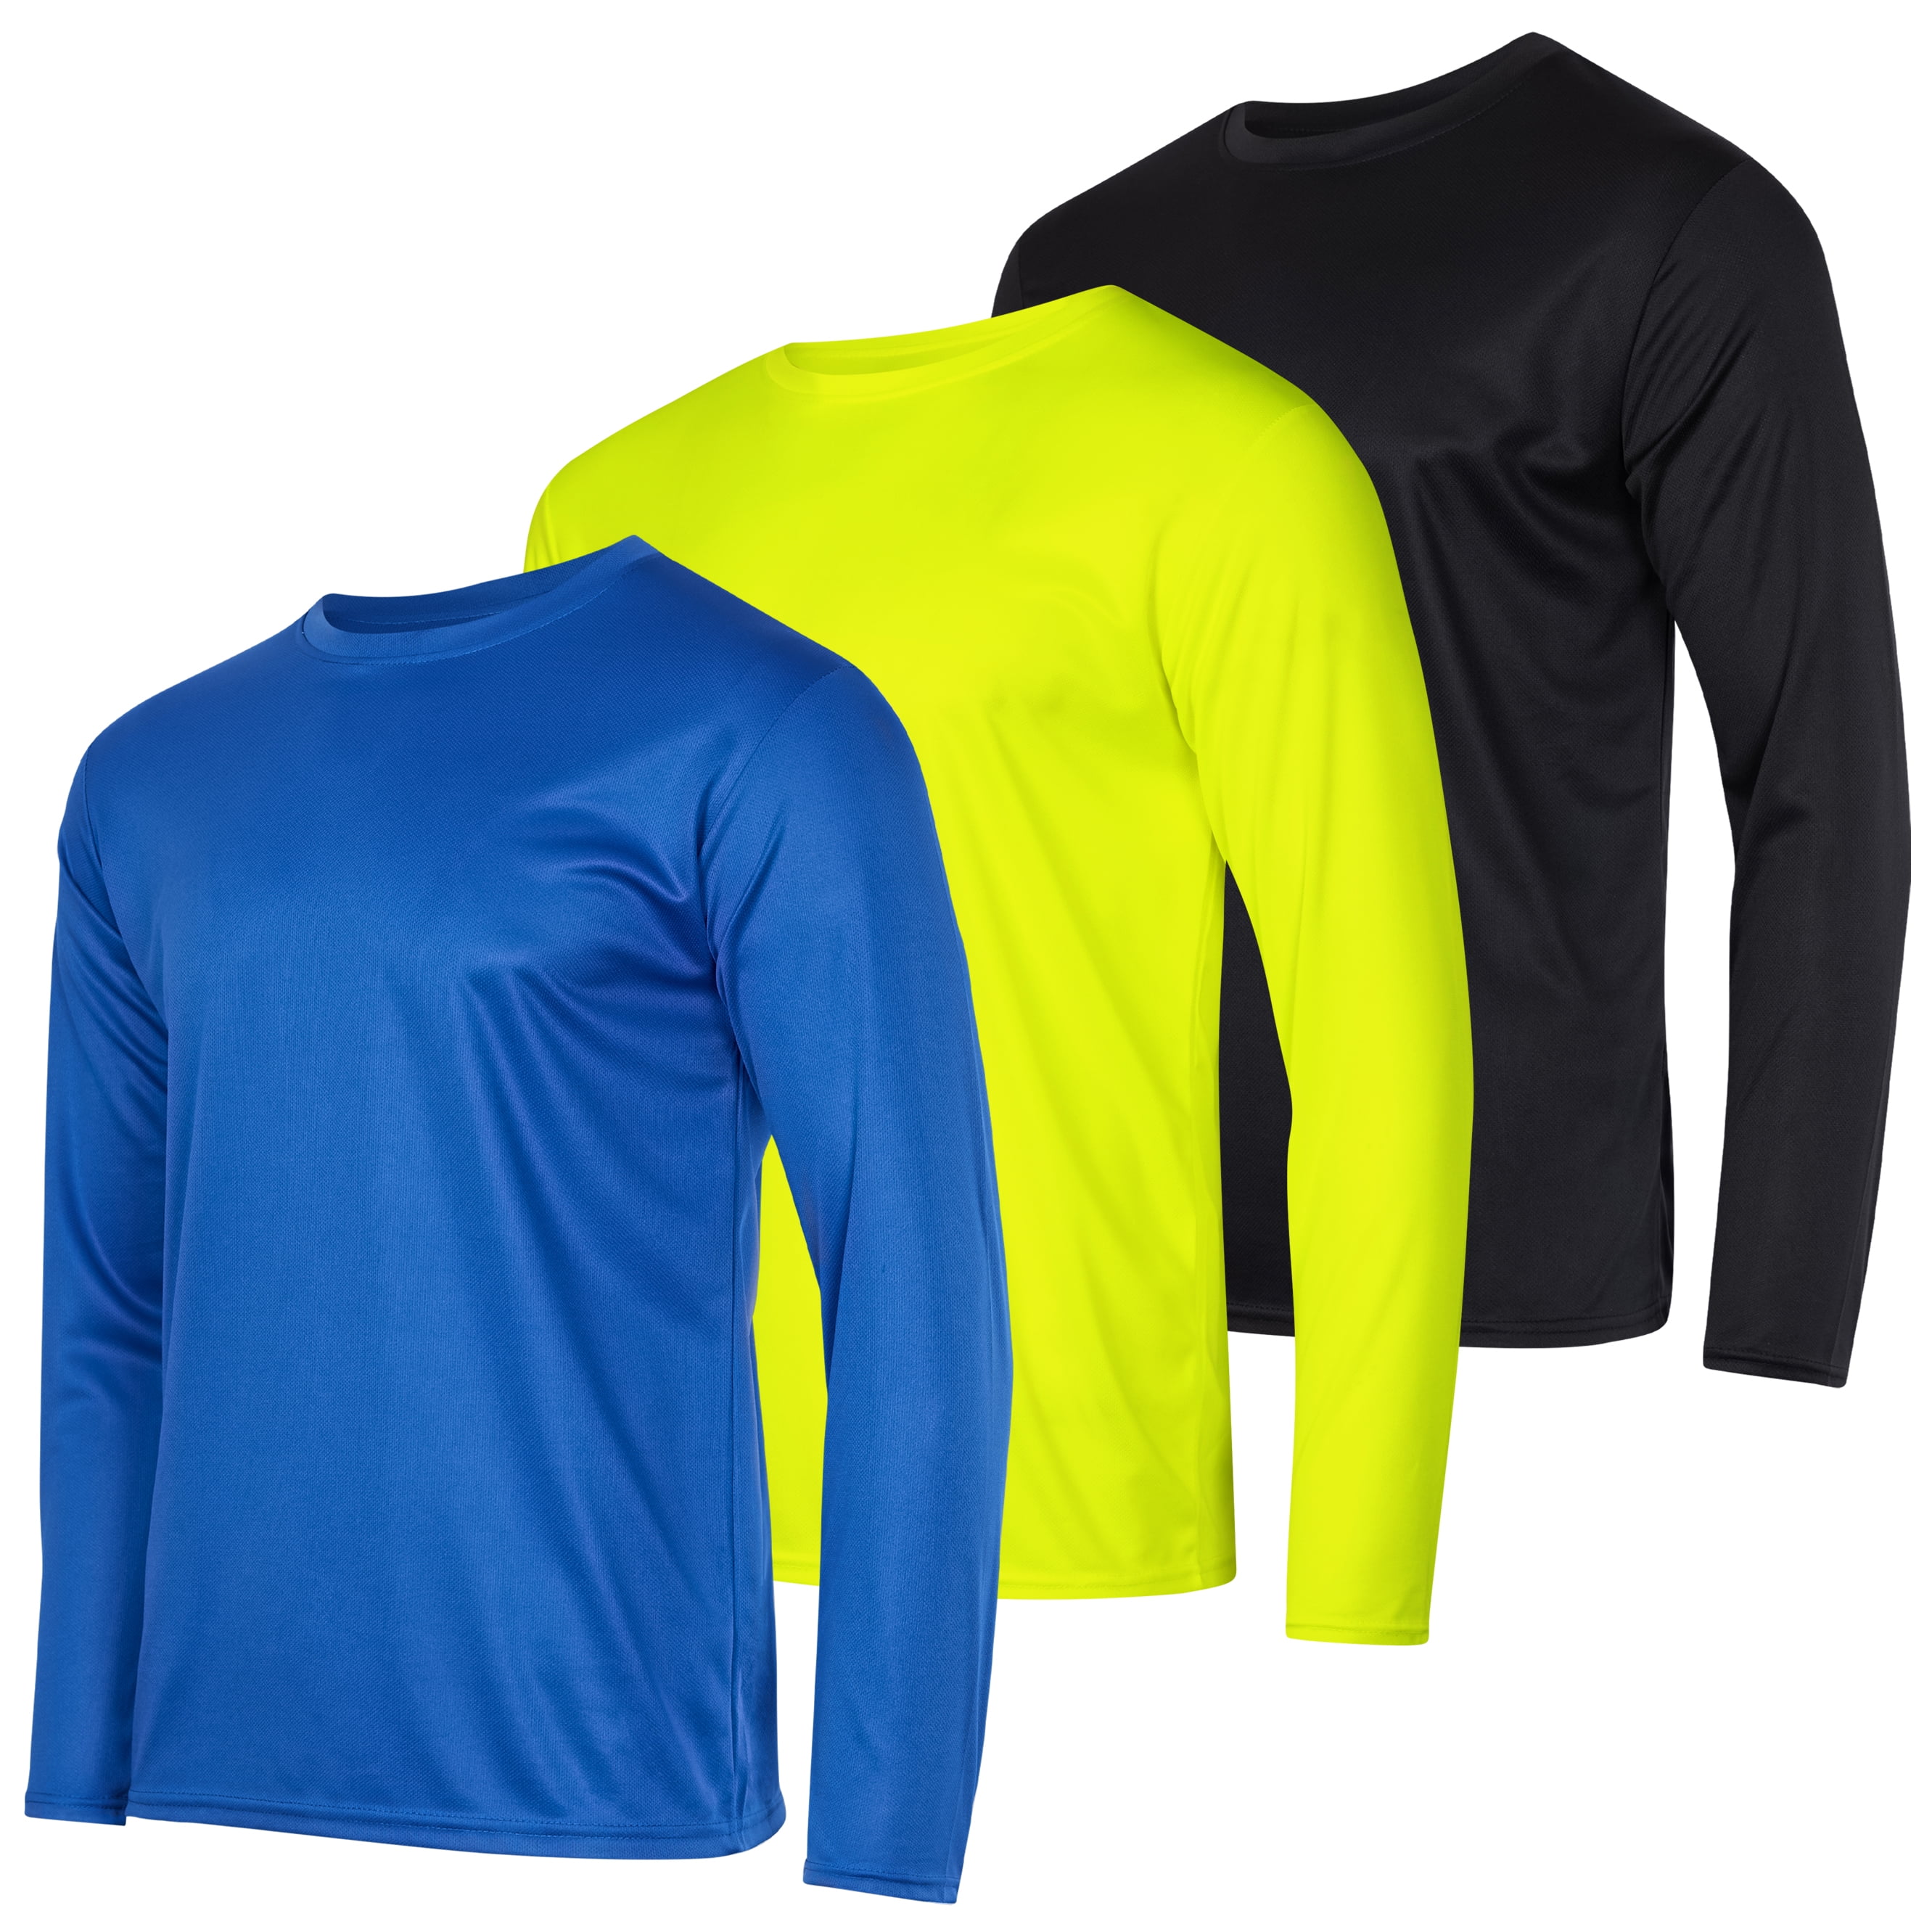 Real Essentials 3 & 5 Pack: Men's Mesh Quick Dry Athletic Long Sleeve T ...